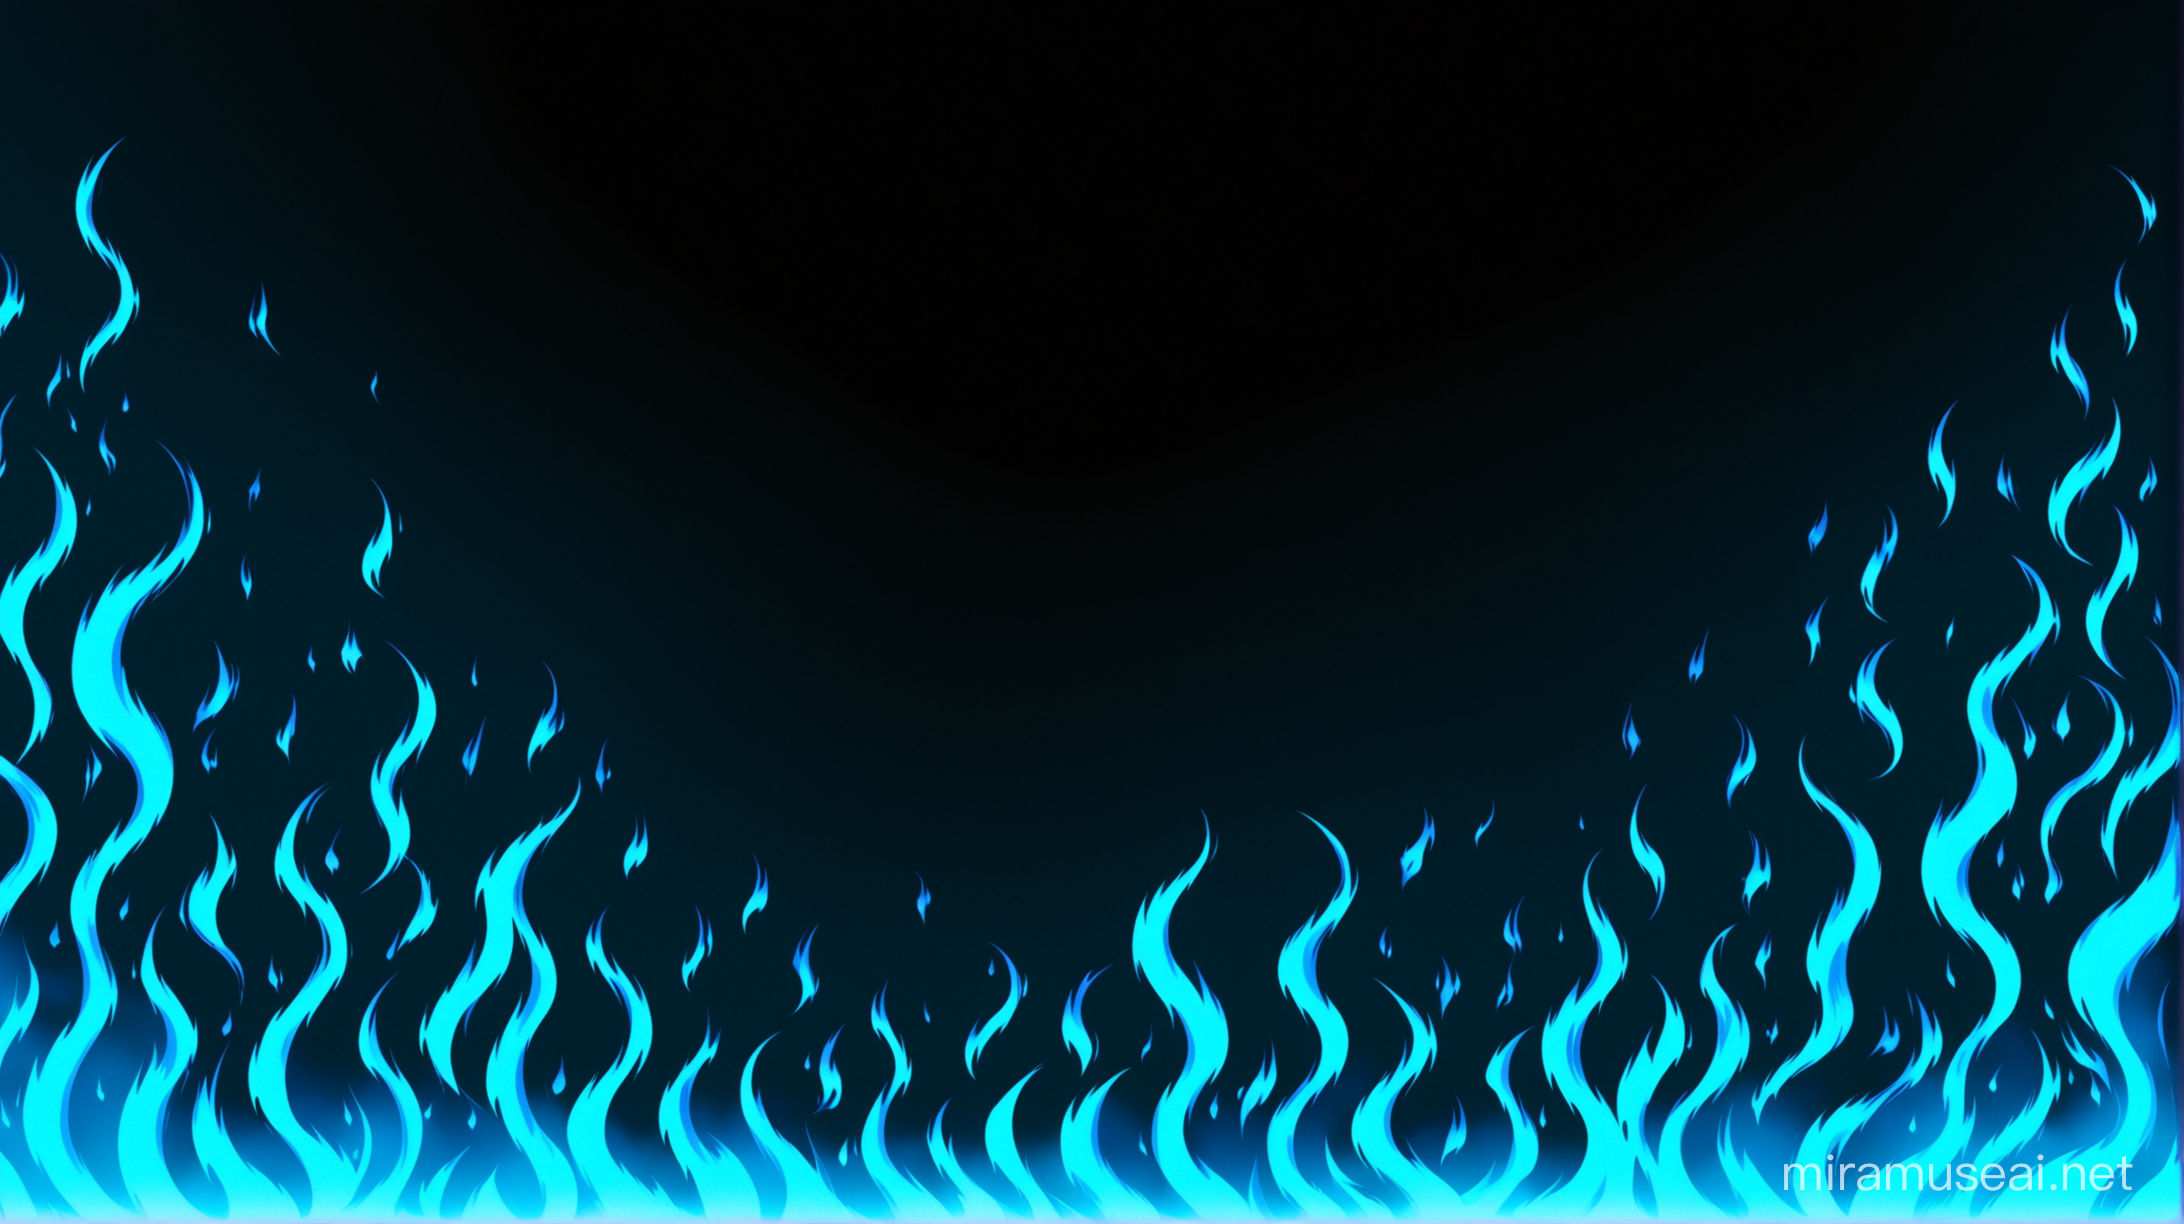 Clean Vector Style Black Background with Subtle Blue Flames Pattern